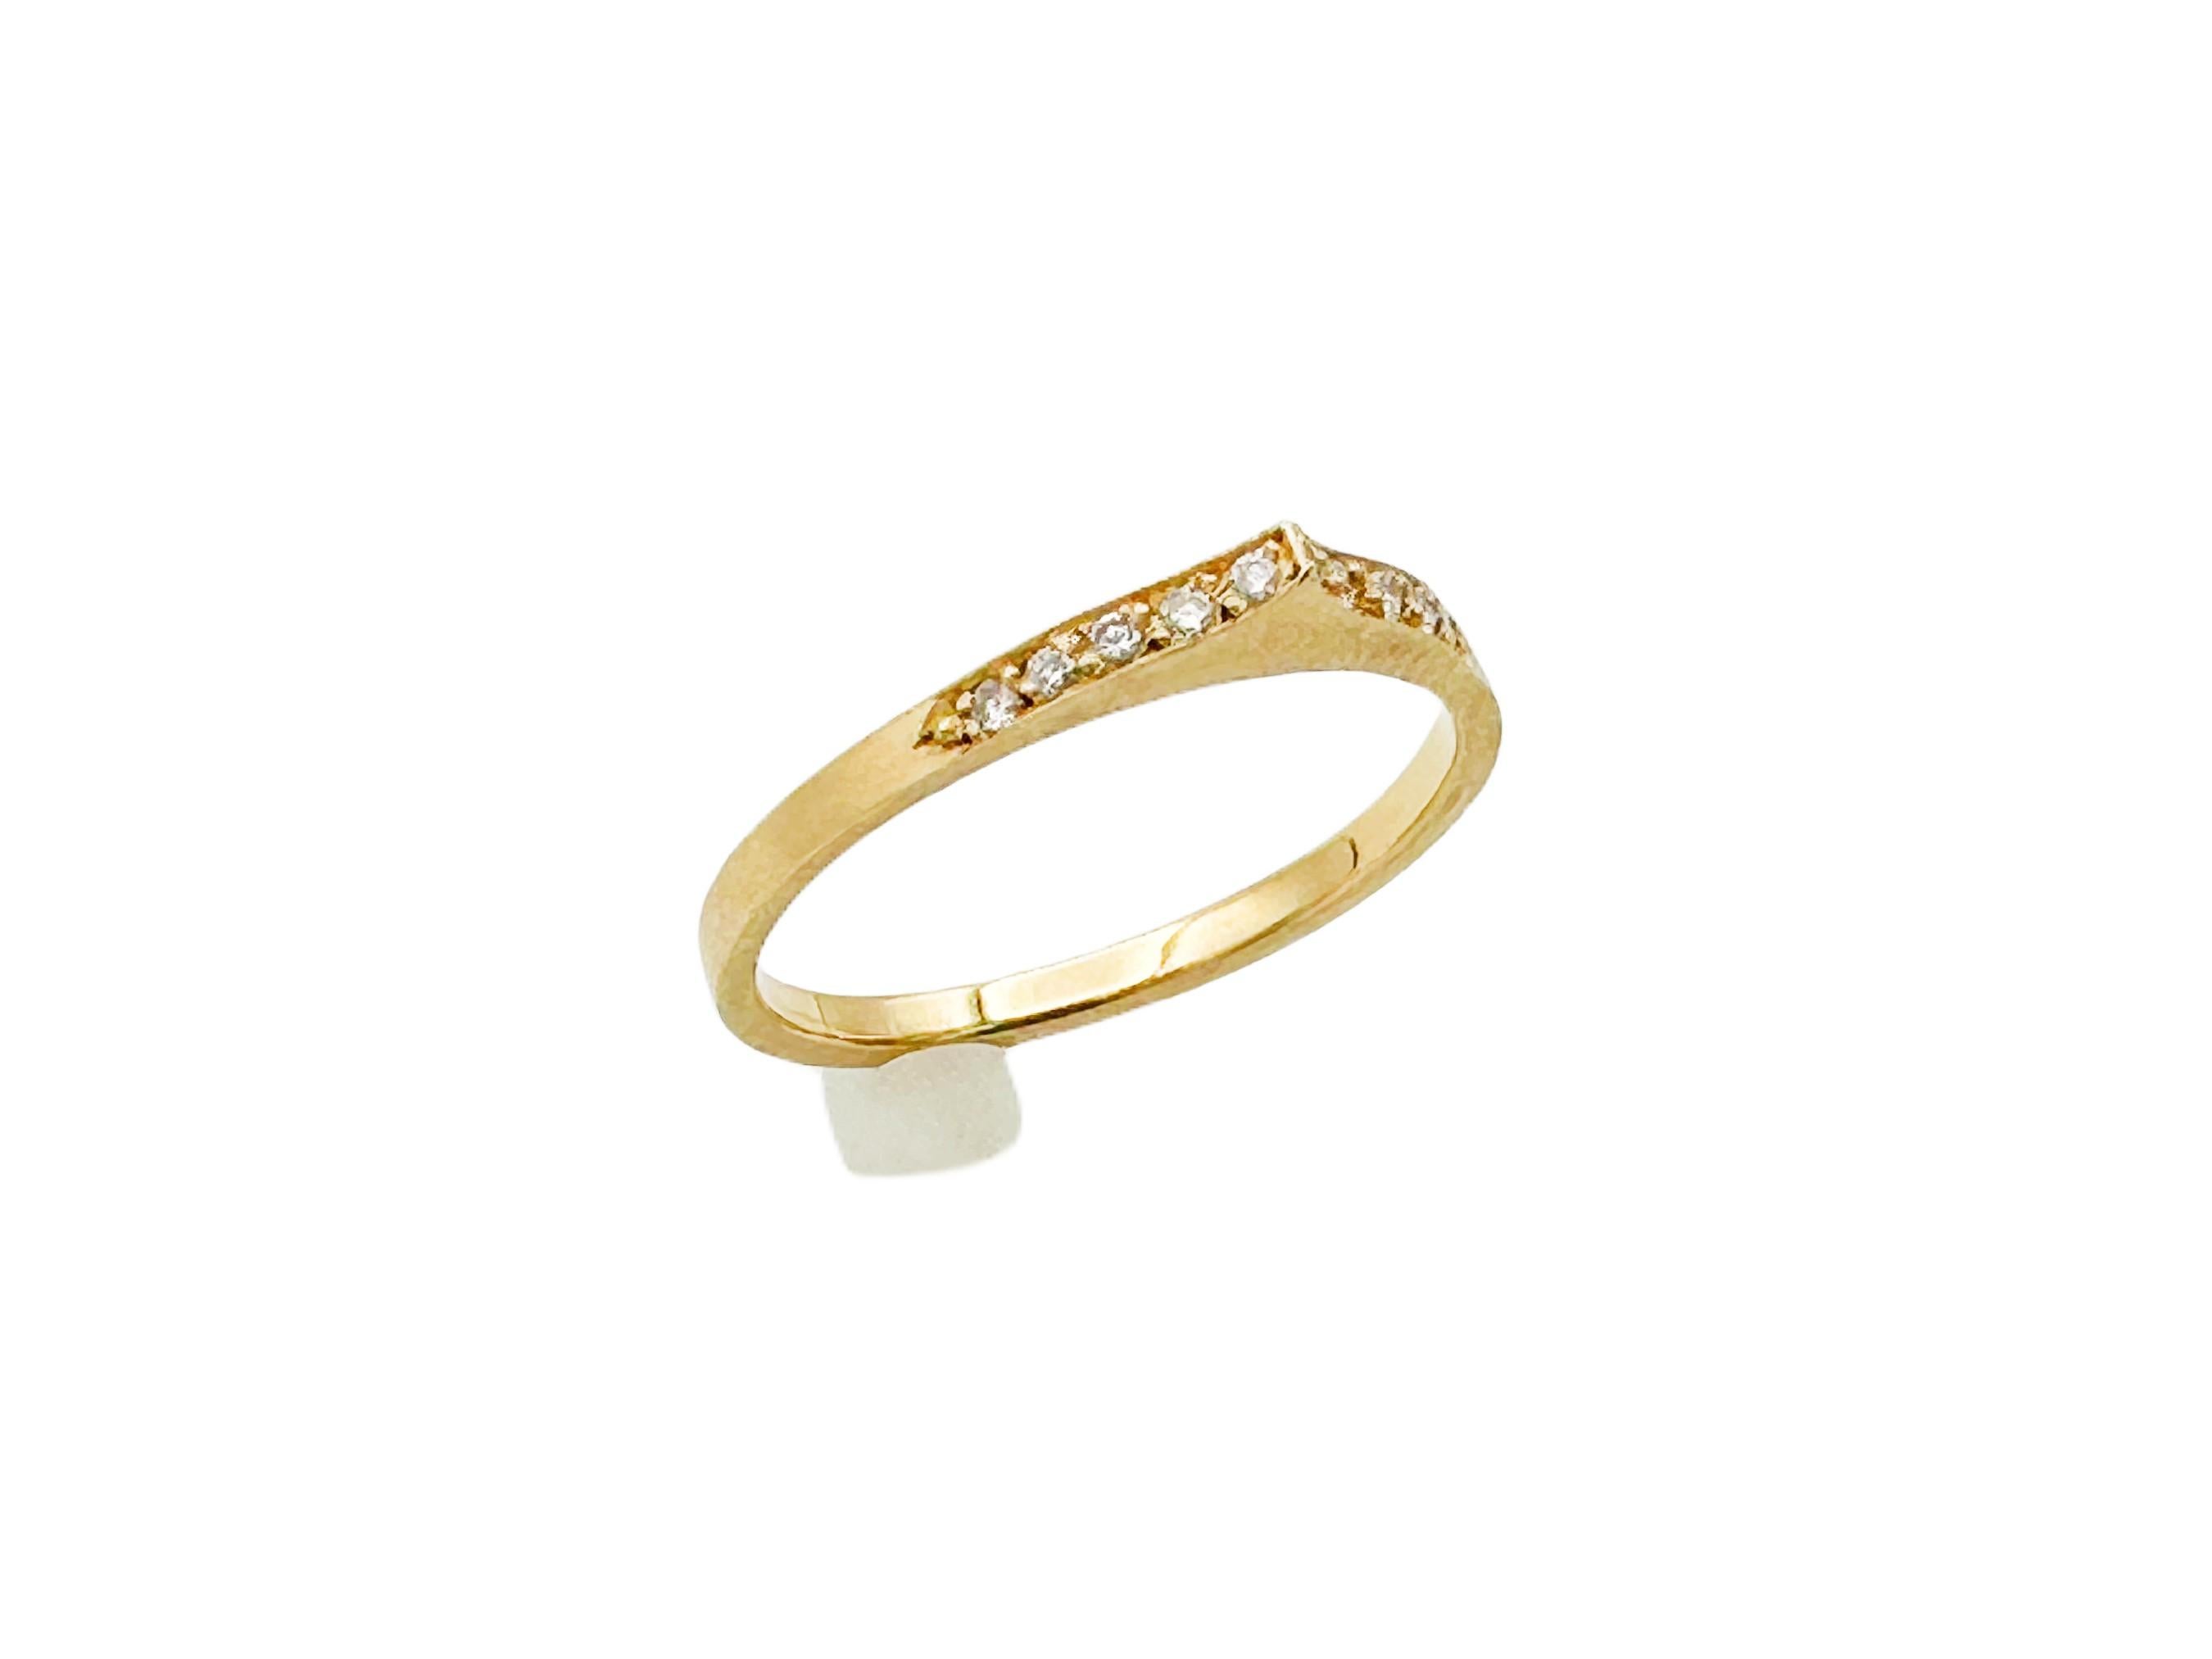 Let your commitment sparkle with this beautiful Michelle Fantaci designer diamond wedding band! Crafted in 14k yellow gold, it features a unique baby-bird peak, adorned with 10 sparkling diamonds. Delicate and stunning, it's perfect for stacking or